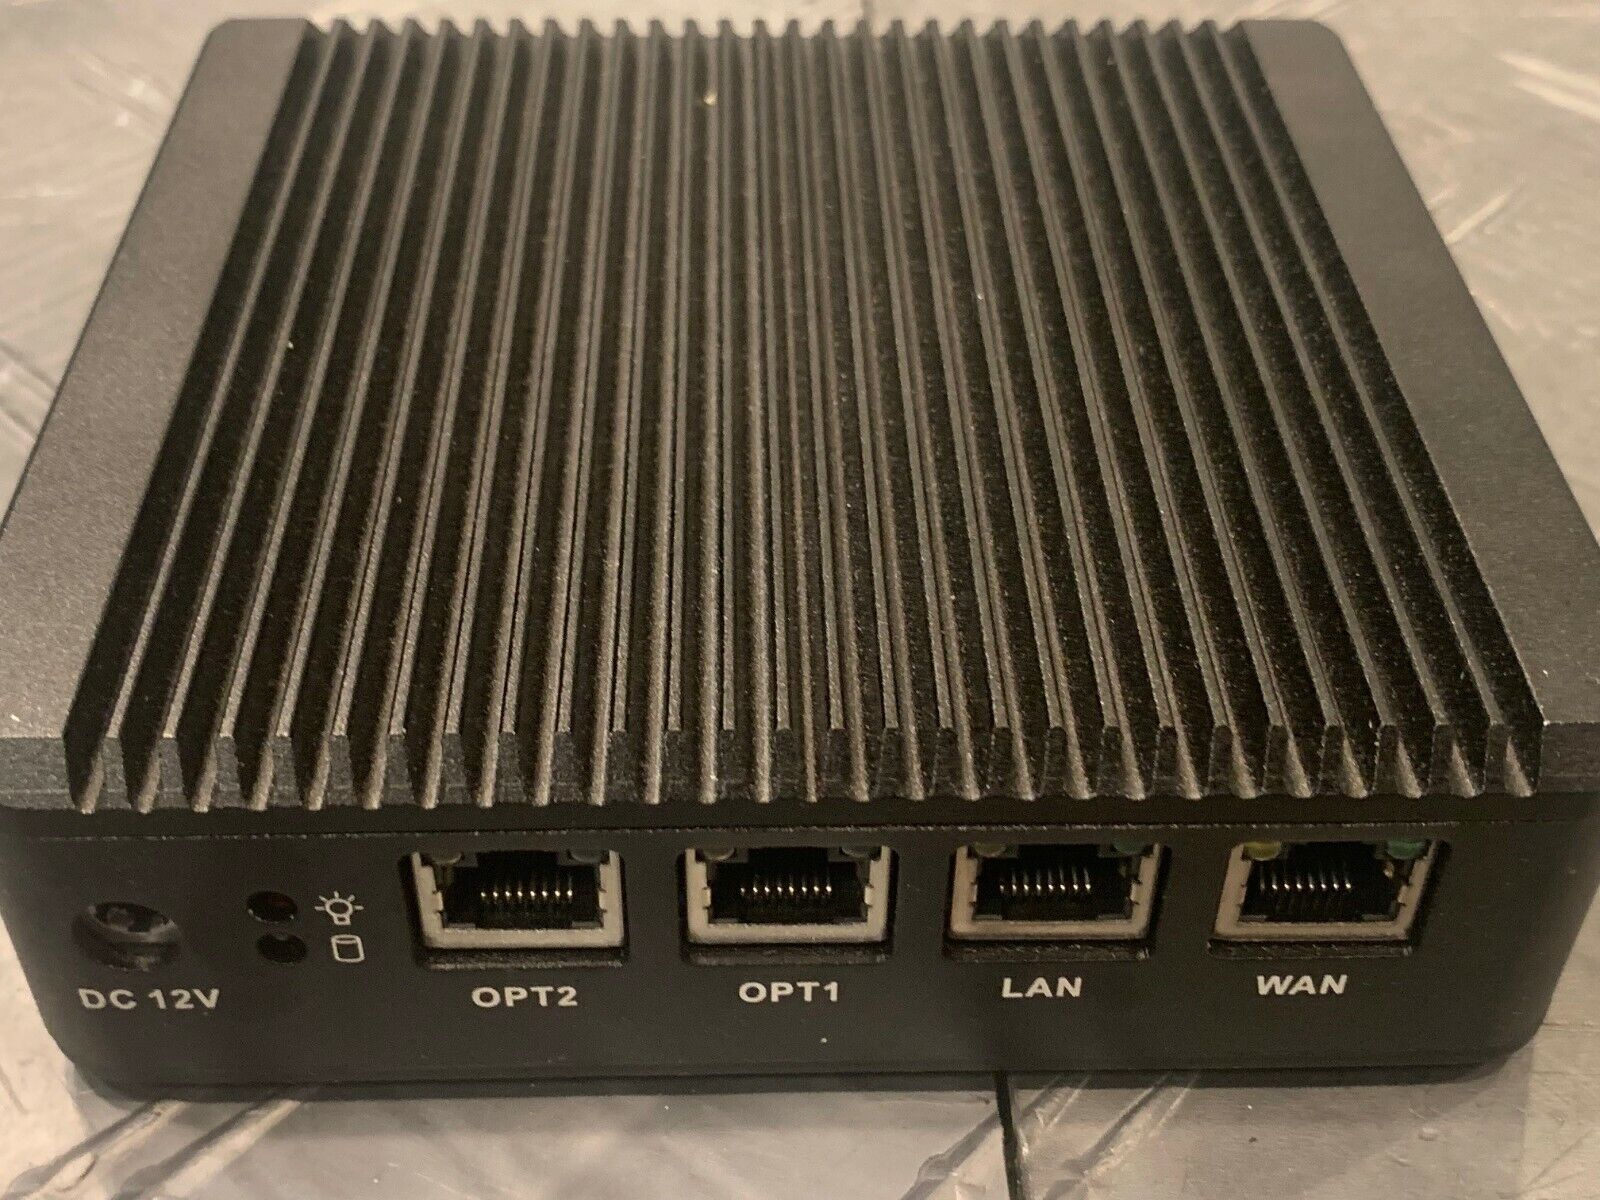 Protectli Vault 4 Port Micro Firewall FW10408 loaded with PFsense 2.6, No AES-NI